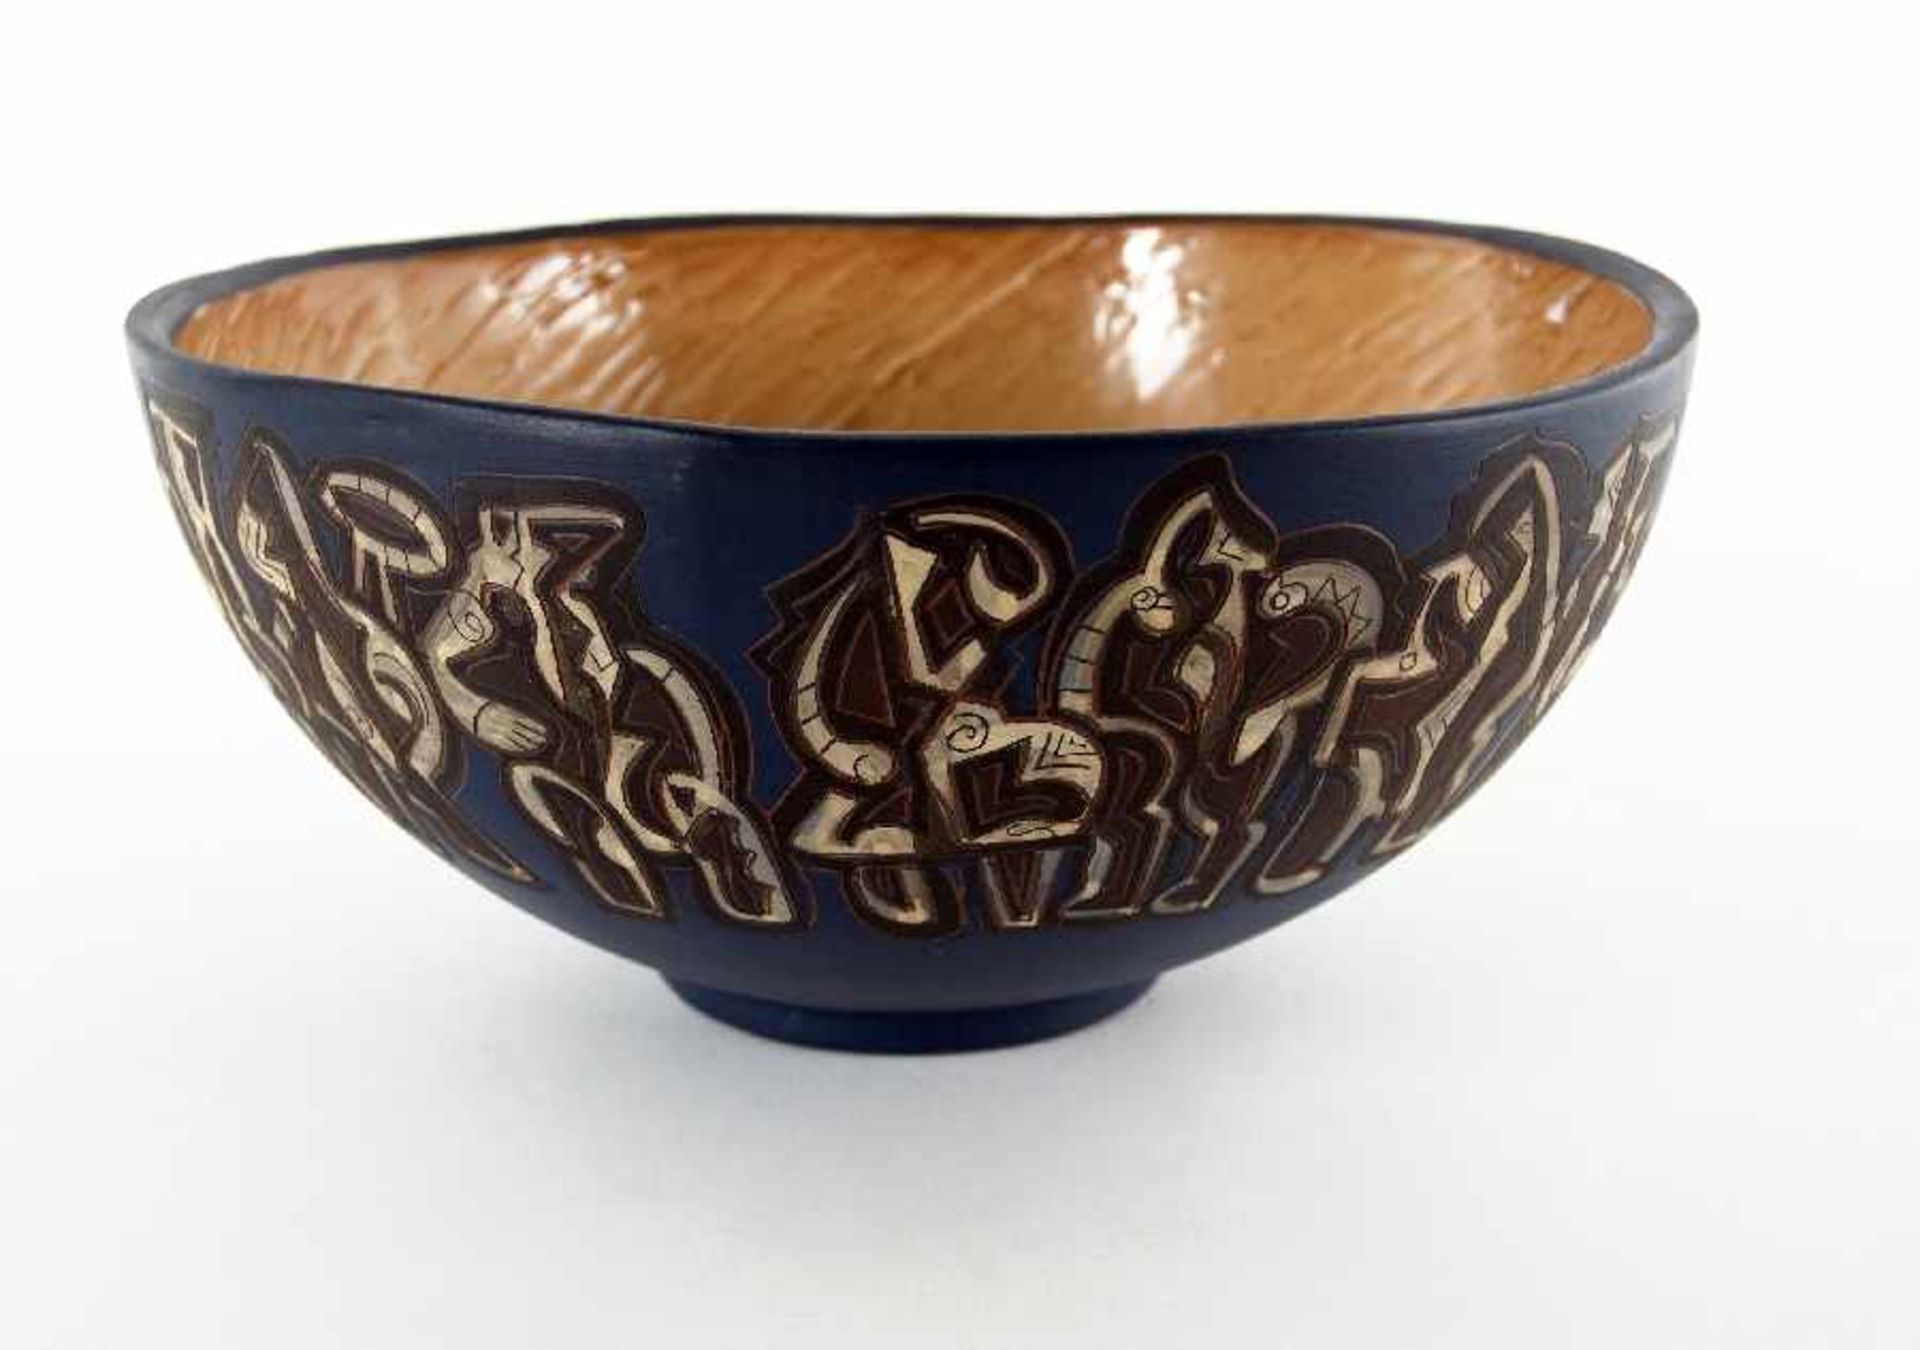 Can KinotoBowl with figurative ornamentCeramic, glazed in color and incised decoration; Diameter